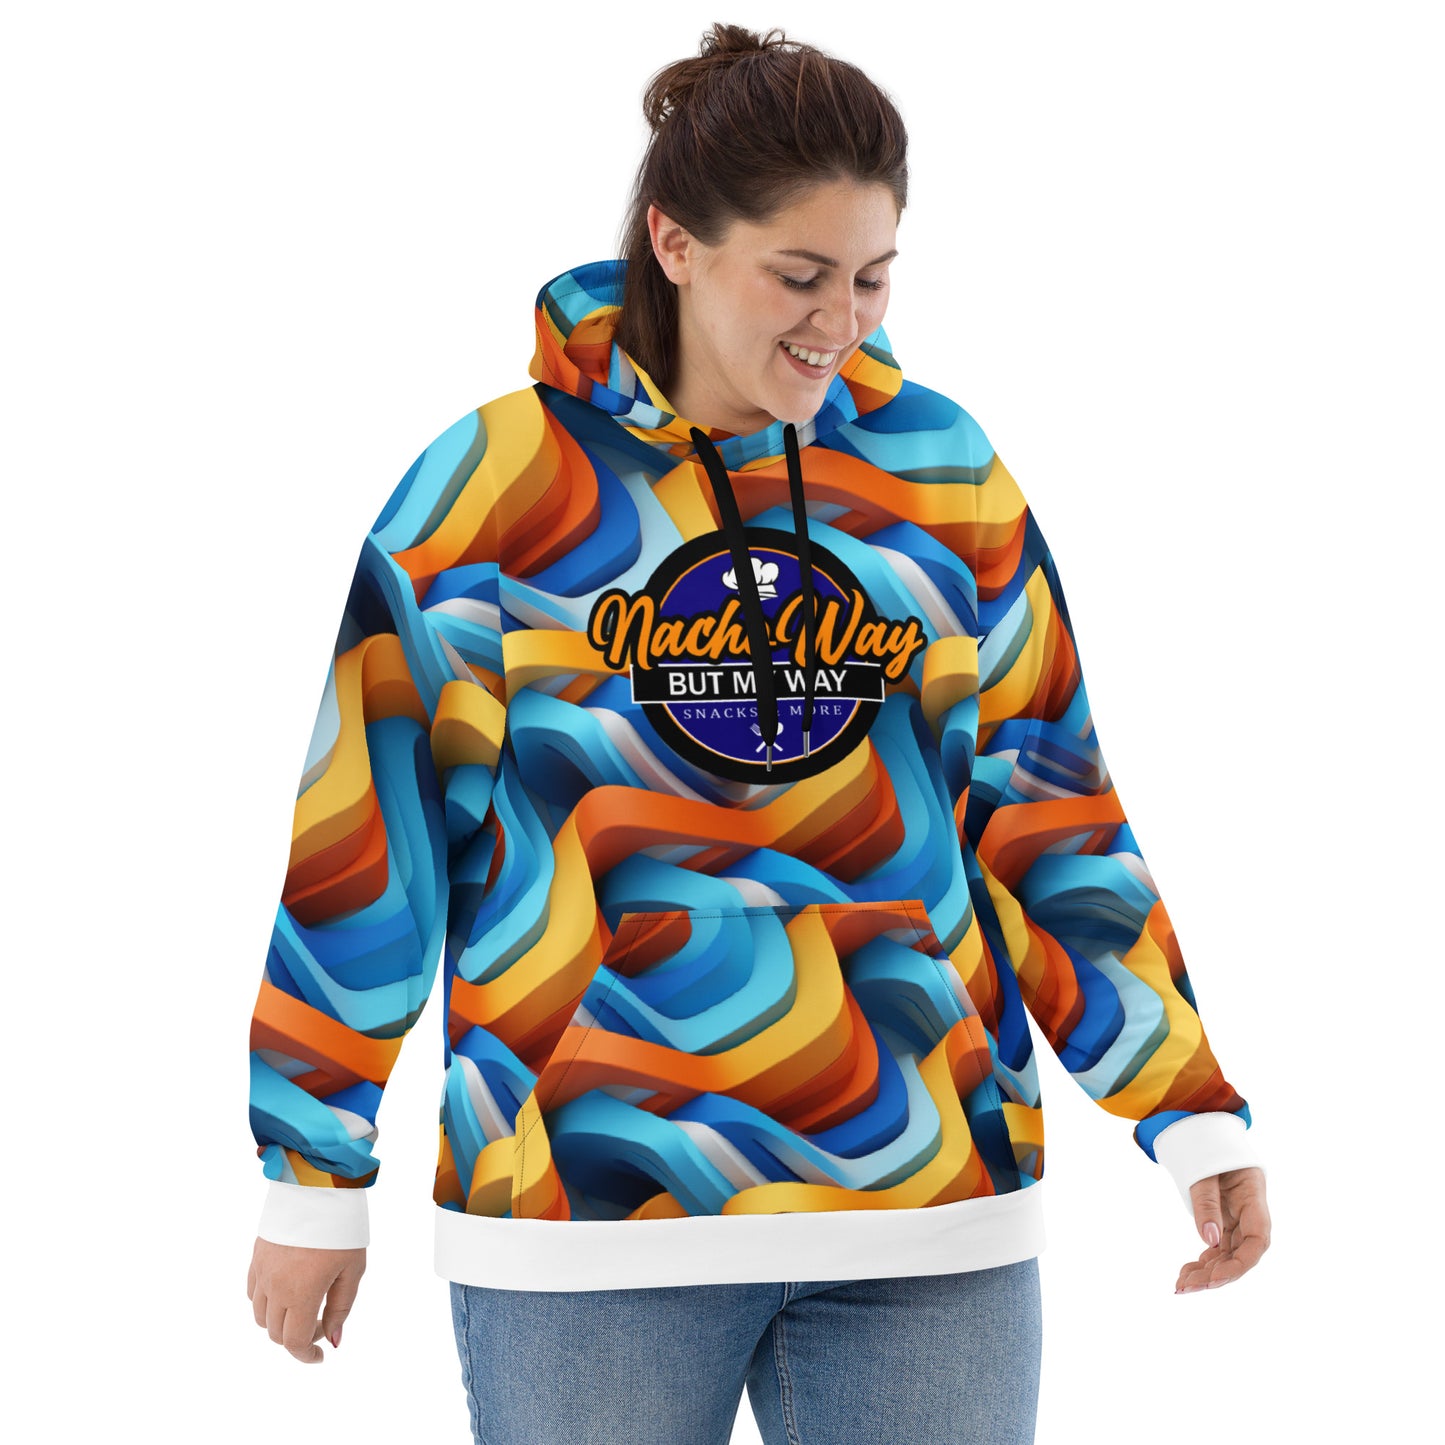 NachoWay "Go With The Flow" Hoodie